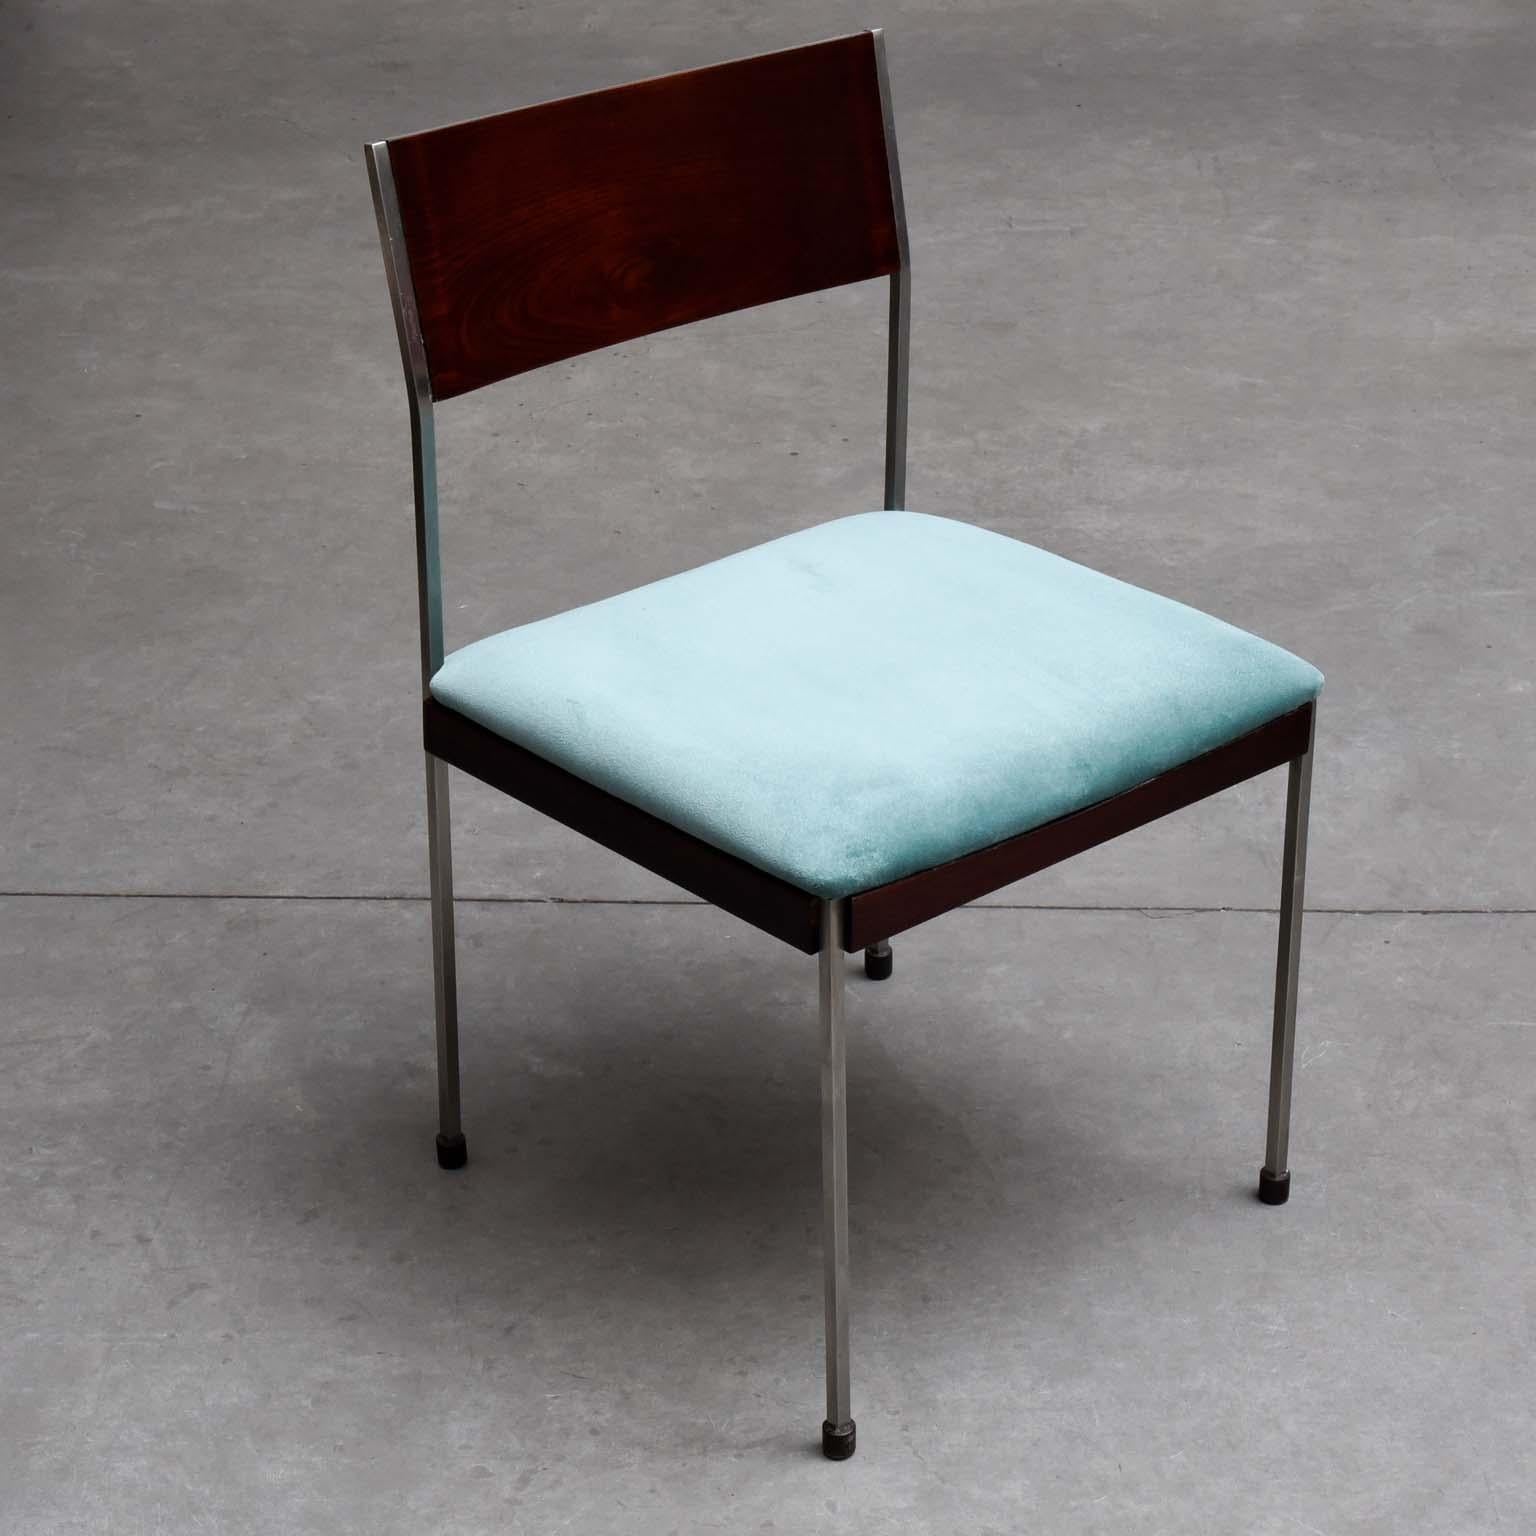 Midcentury Brazilian chair with stainless steel and rosewood structure, 1960s

Incredibly Minimalist and beautiful, this chair model has its structure all built in stainless steel and the highlight in the rosewood backrest.